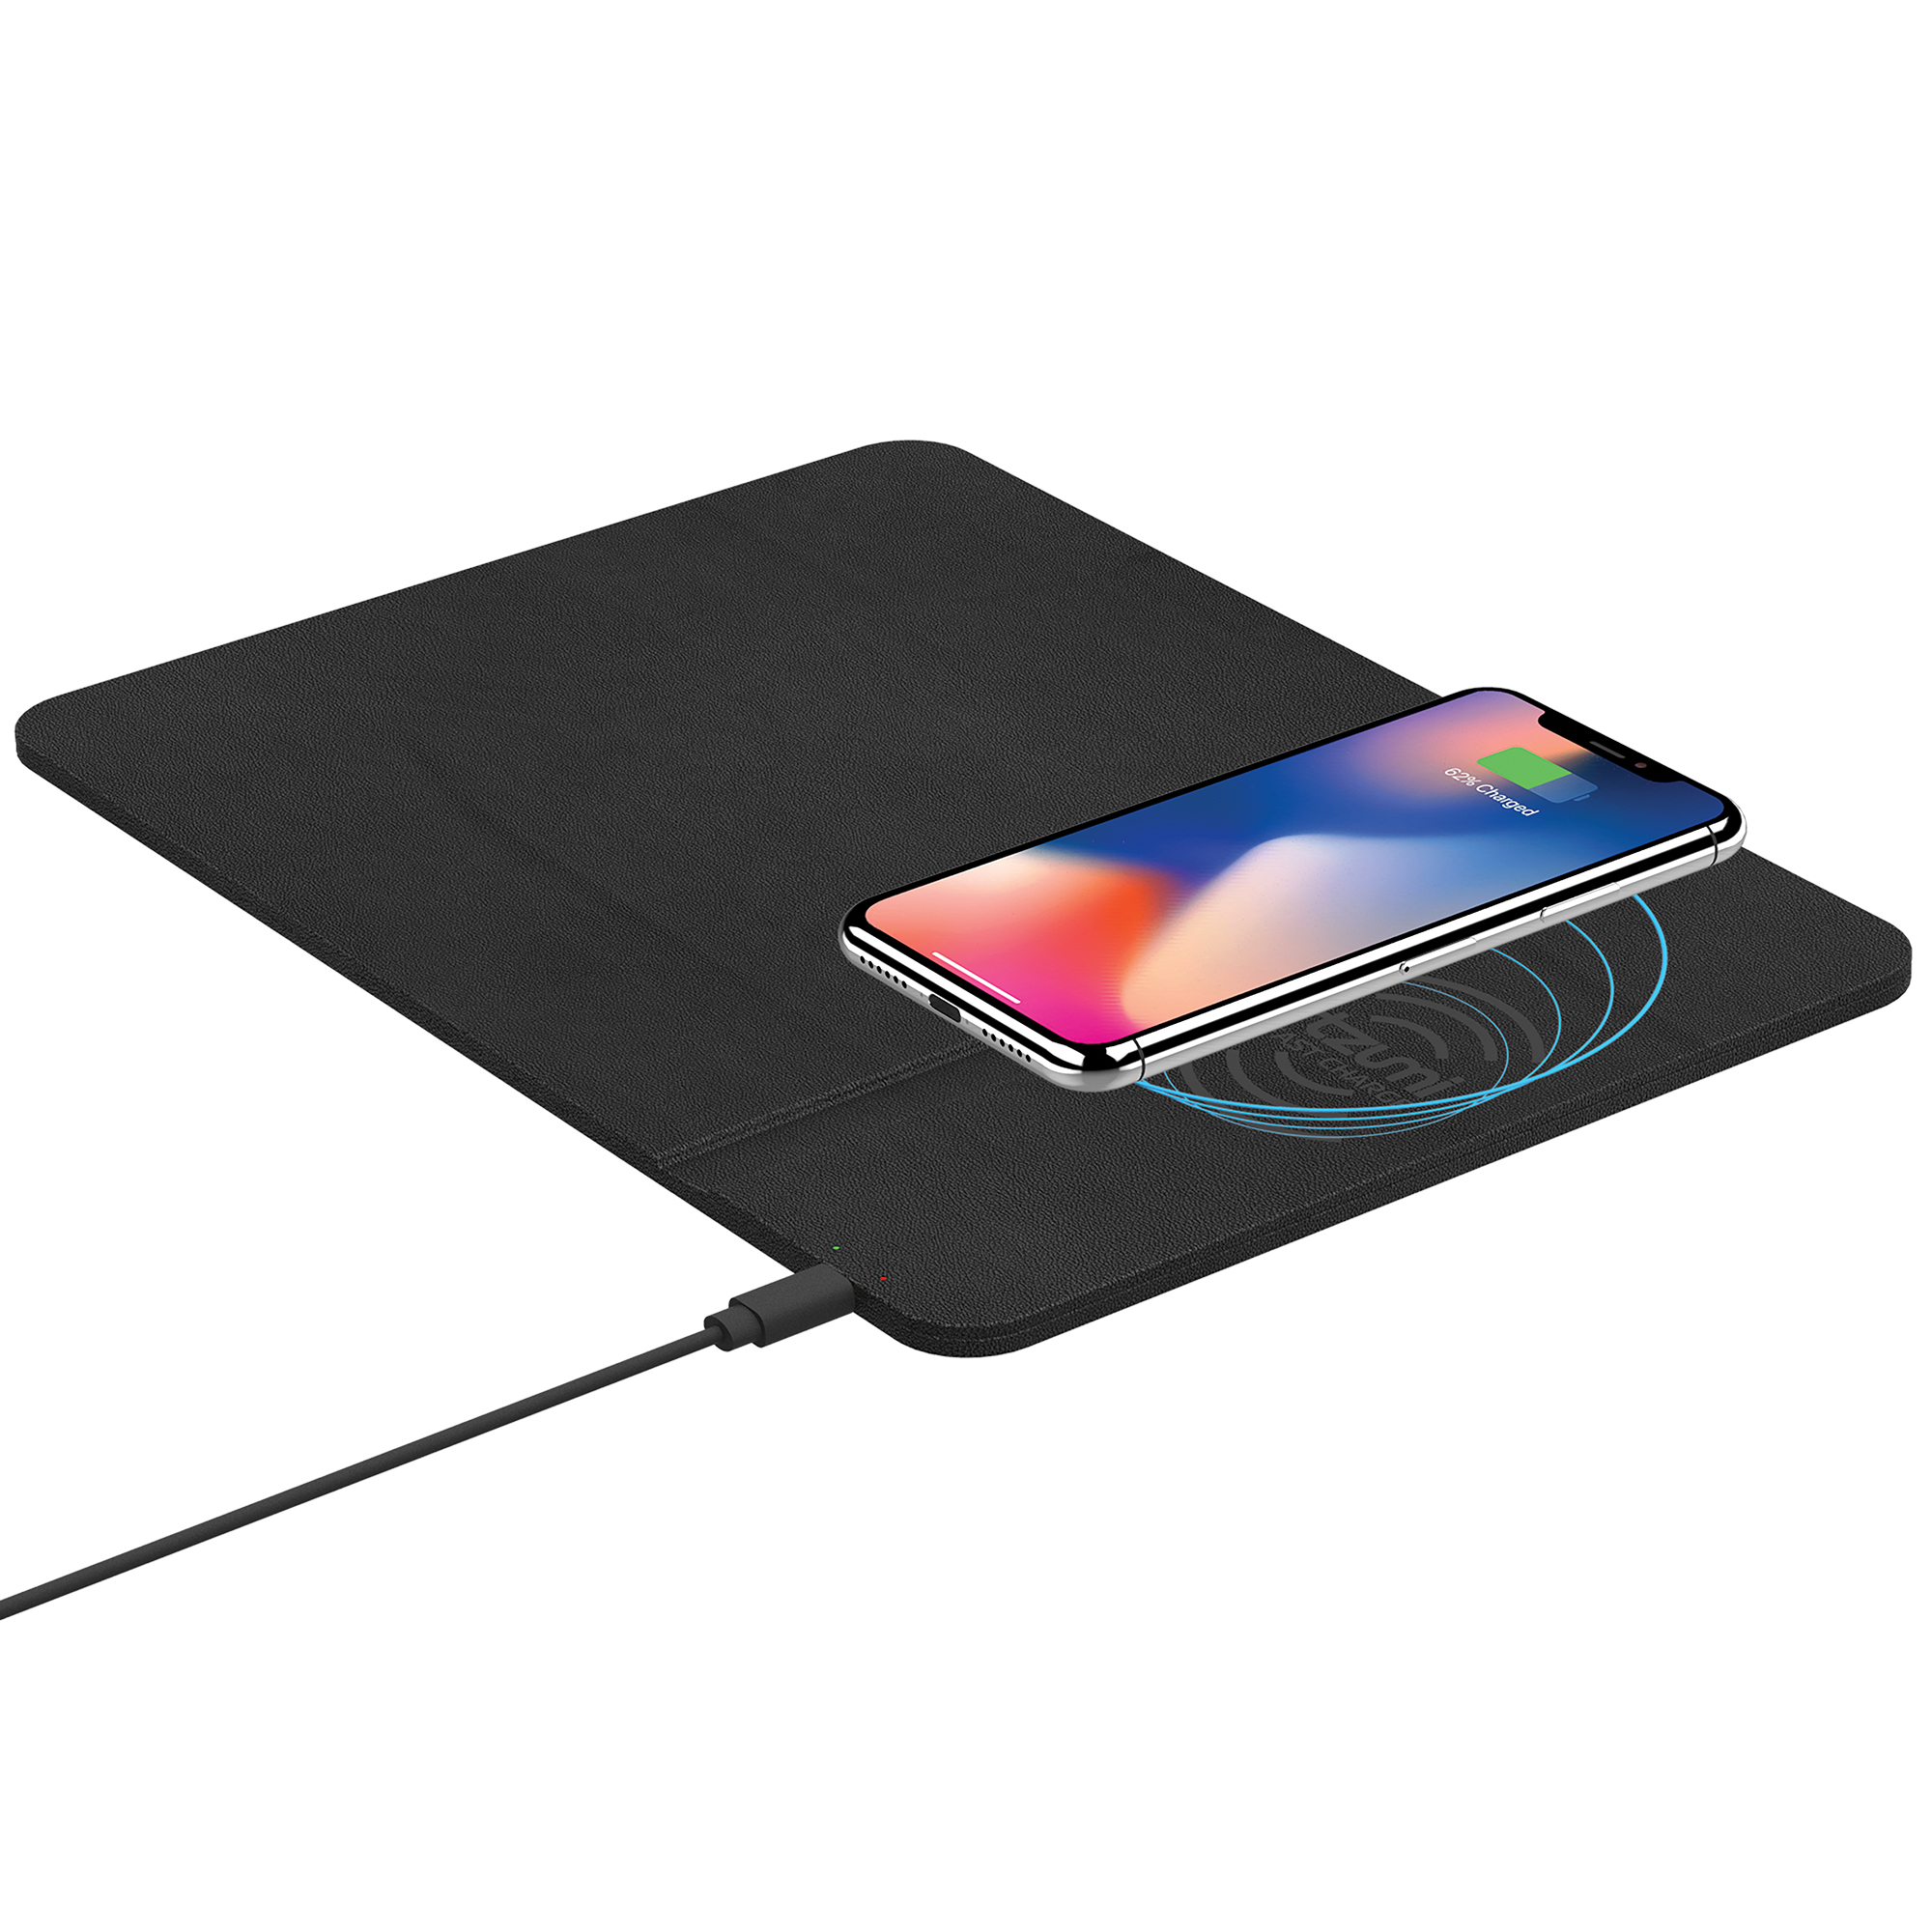 Tzumi Wireless Charging Pad and Rechargeable Wireless Mouse - Built-in Wireless Charging Phone Stand for all Qi-Enabled Devices - image 1 of 6